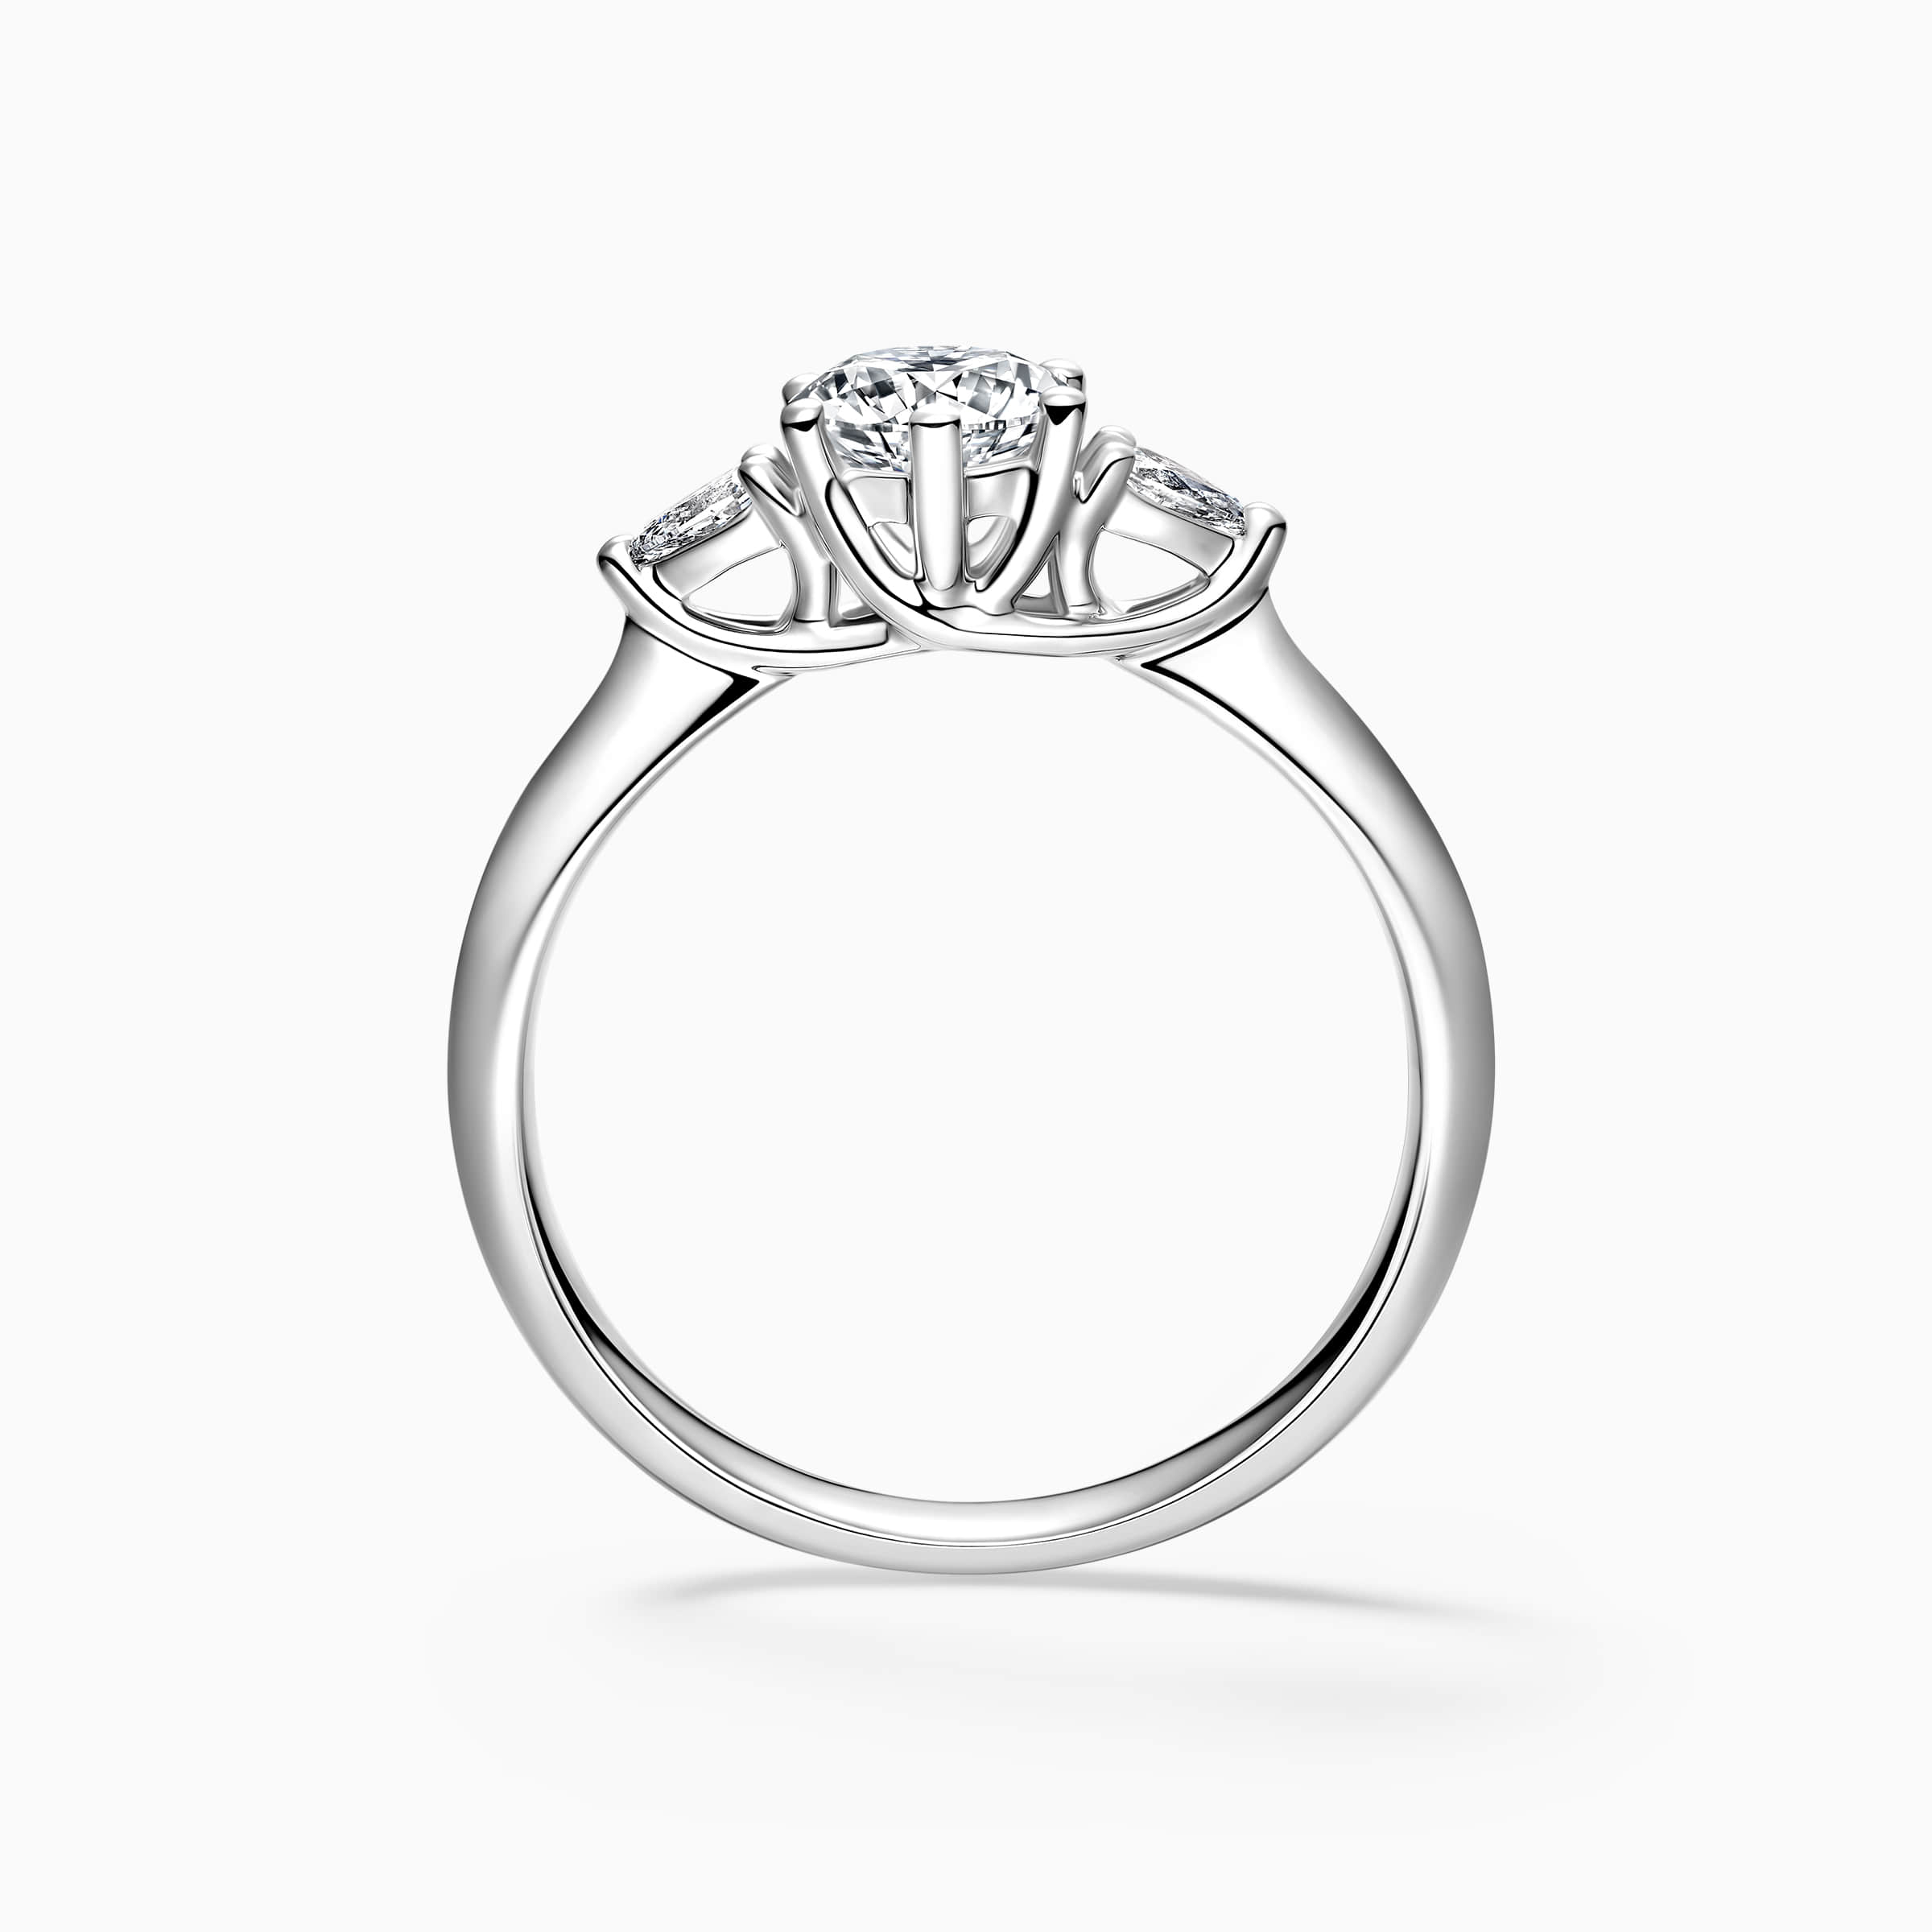 Darry Ring 3 stone engagement ring in platinum